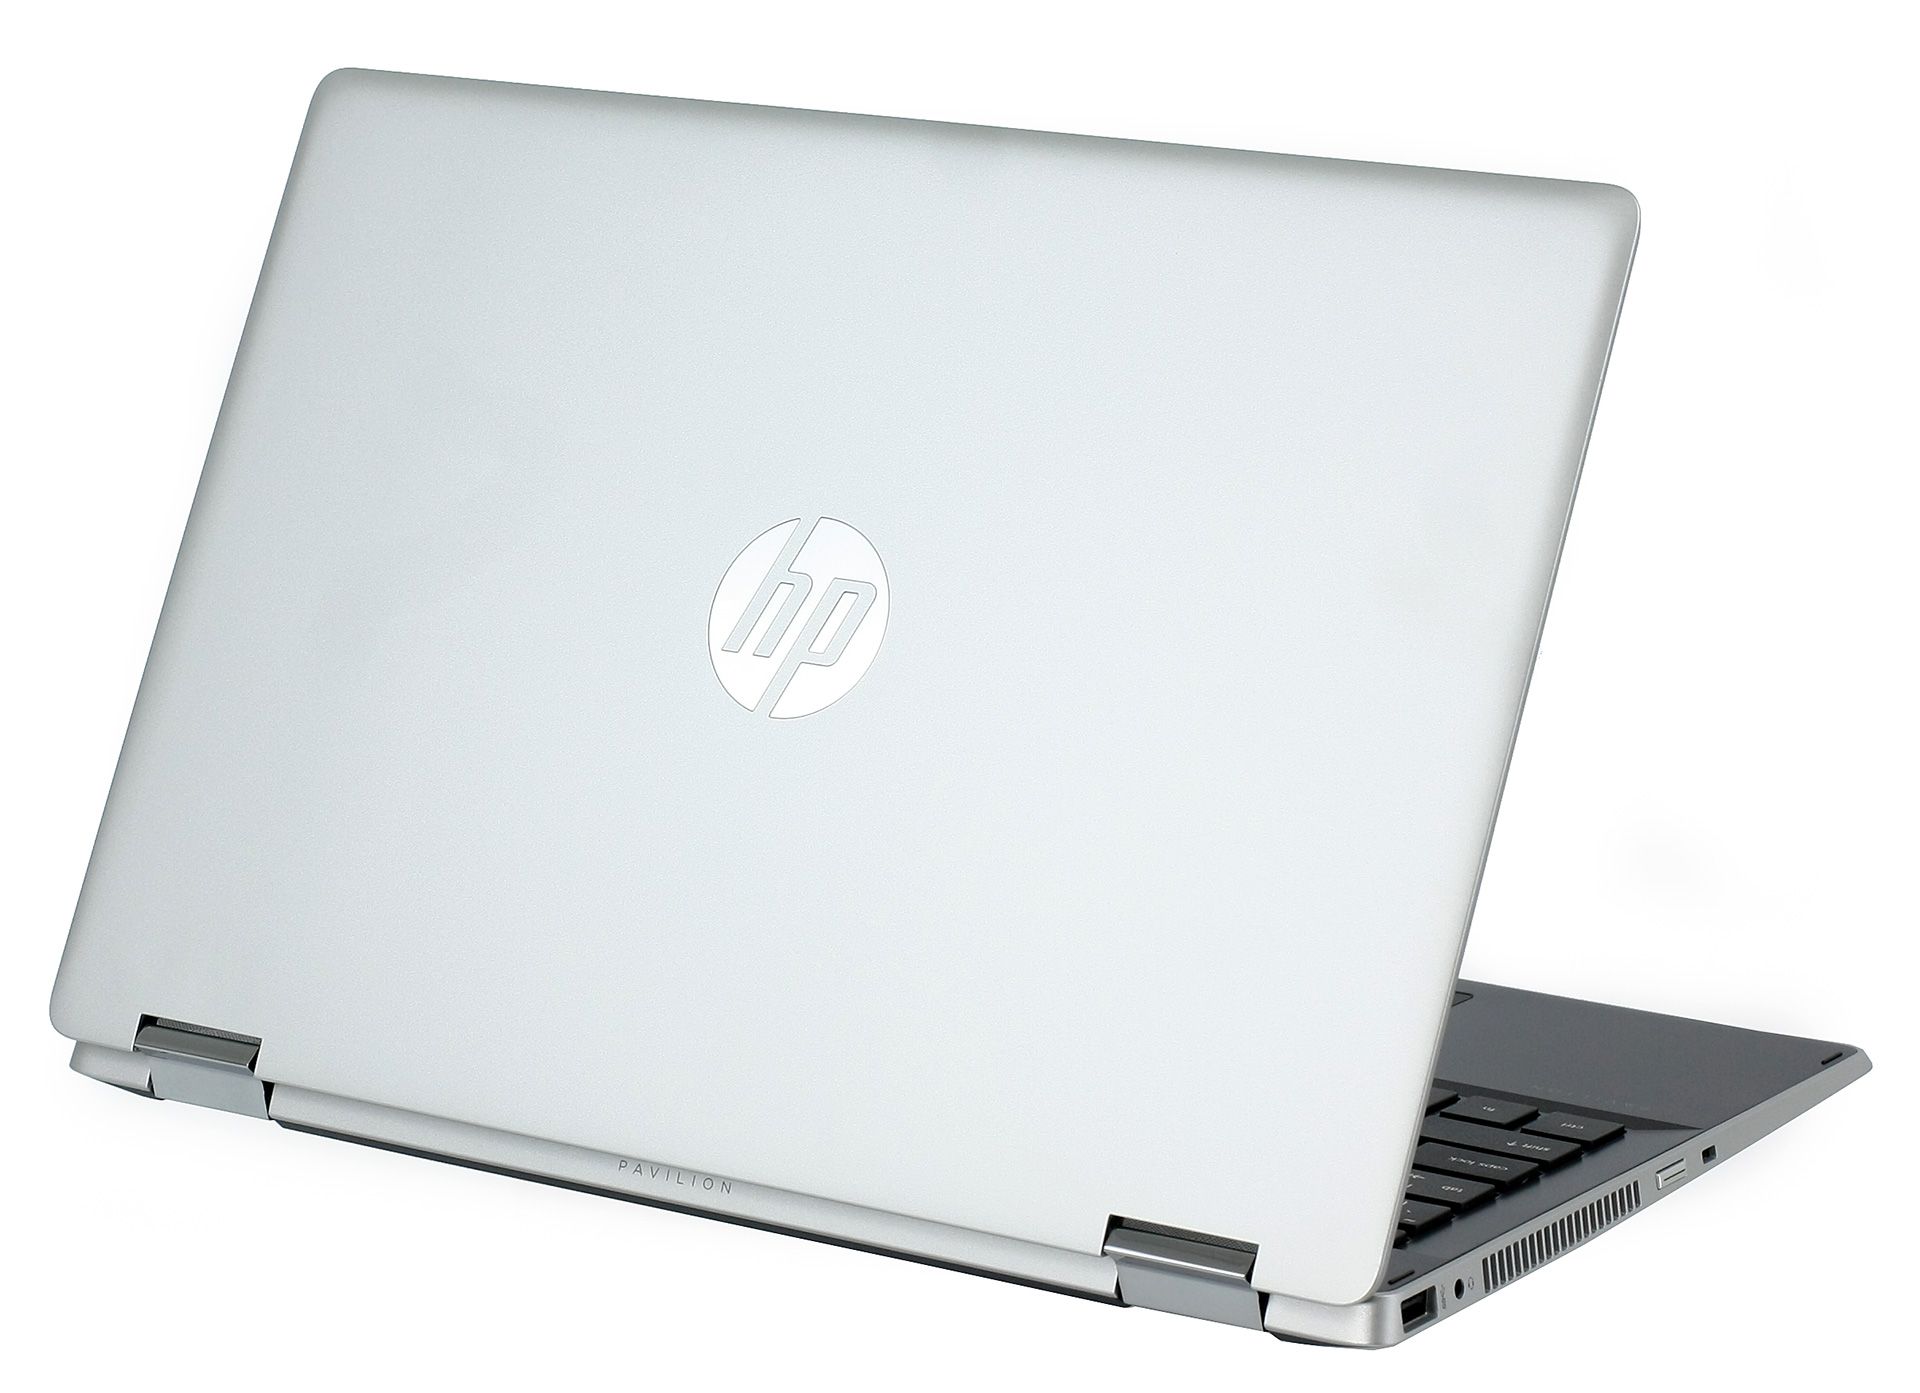 HP Pavilion x360 14 review: A quality convertible PC available at a great  price